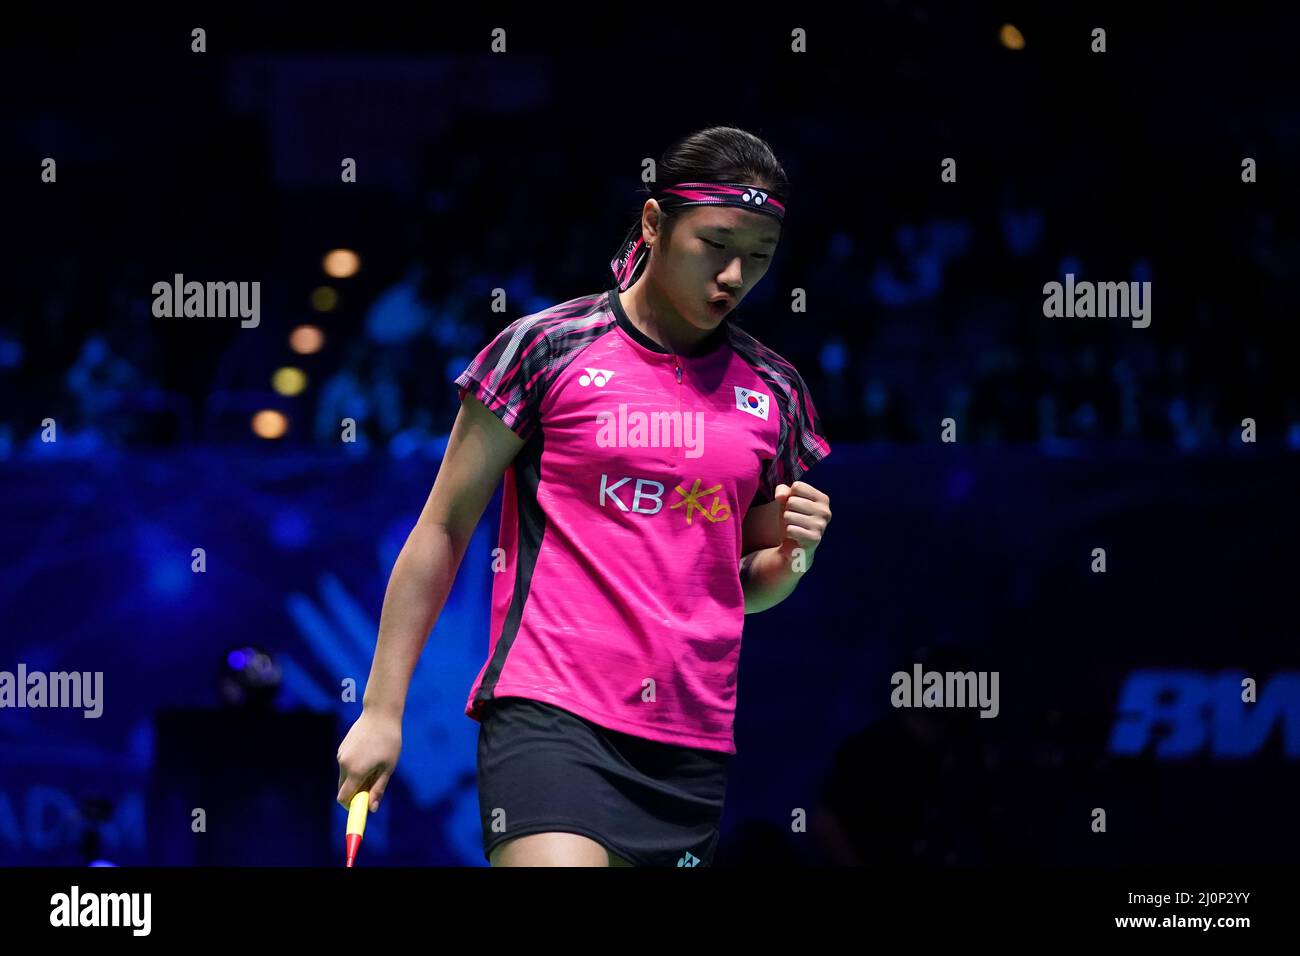 Koreas An Seyoung in action against Japans Akane Yamaguchi during the Womens Singles Final on day five of the YONEX All England Open Badminton Championships at the Utilita Arena Birmingham